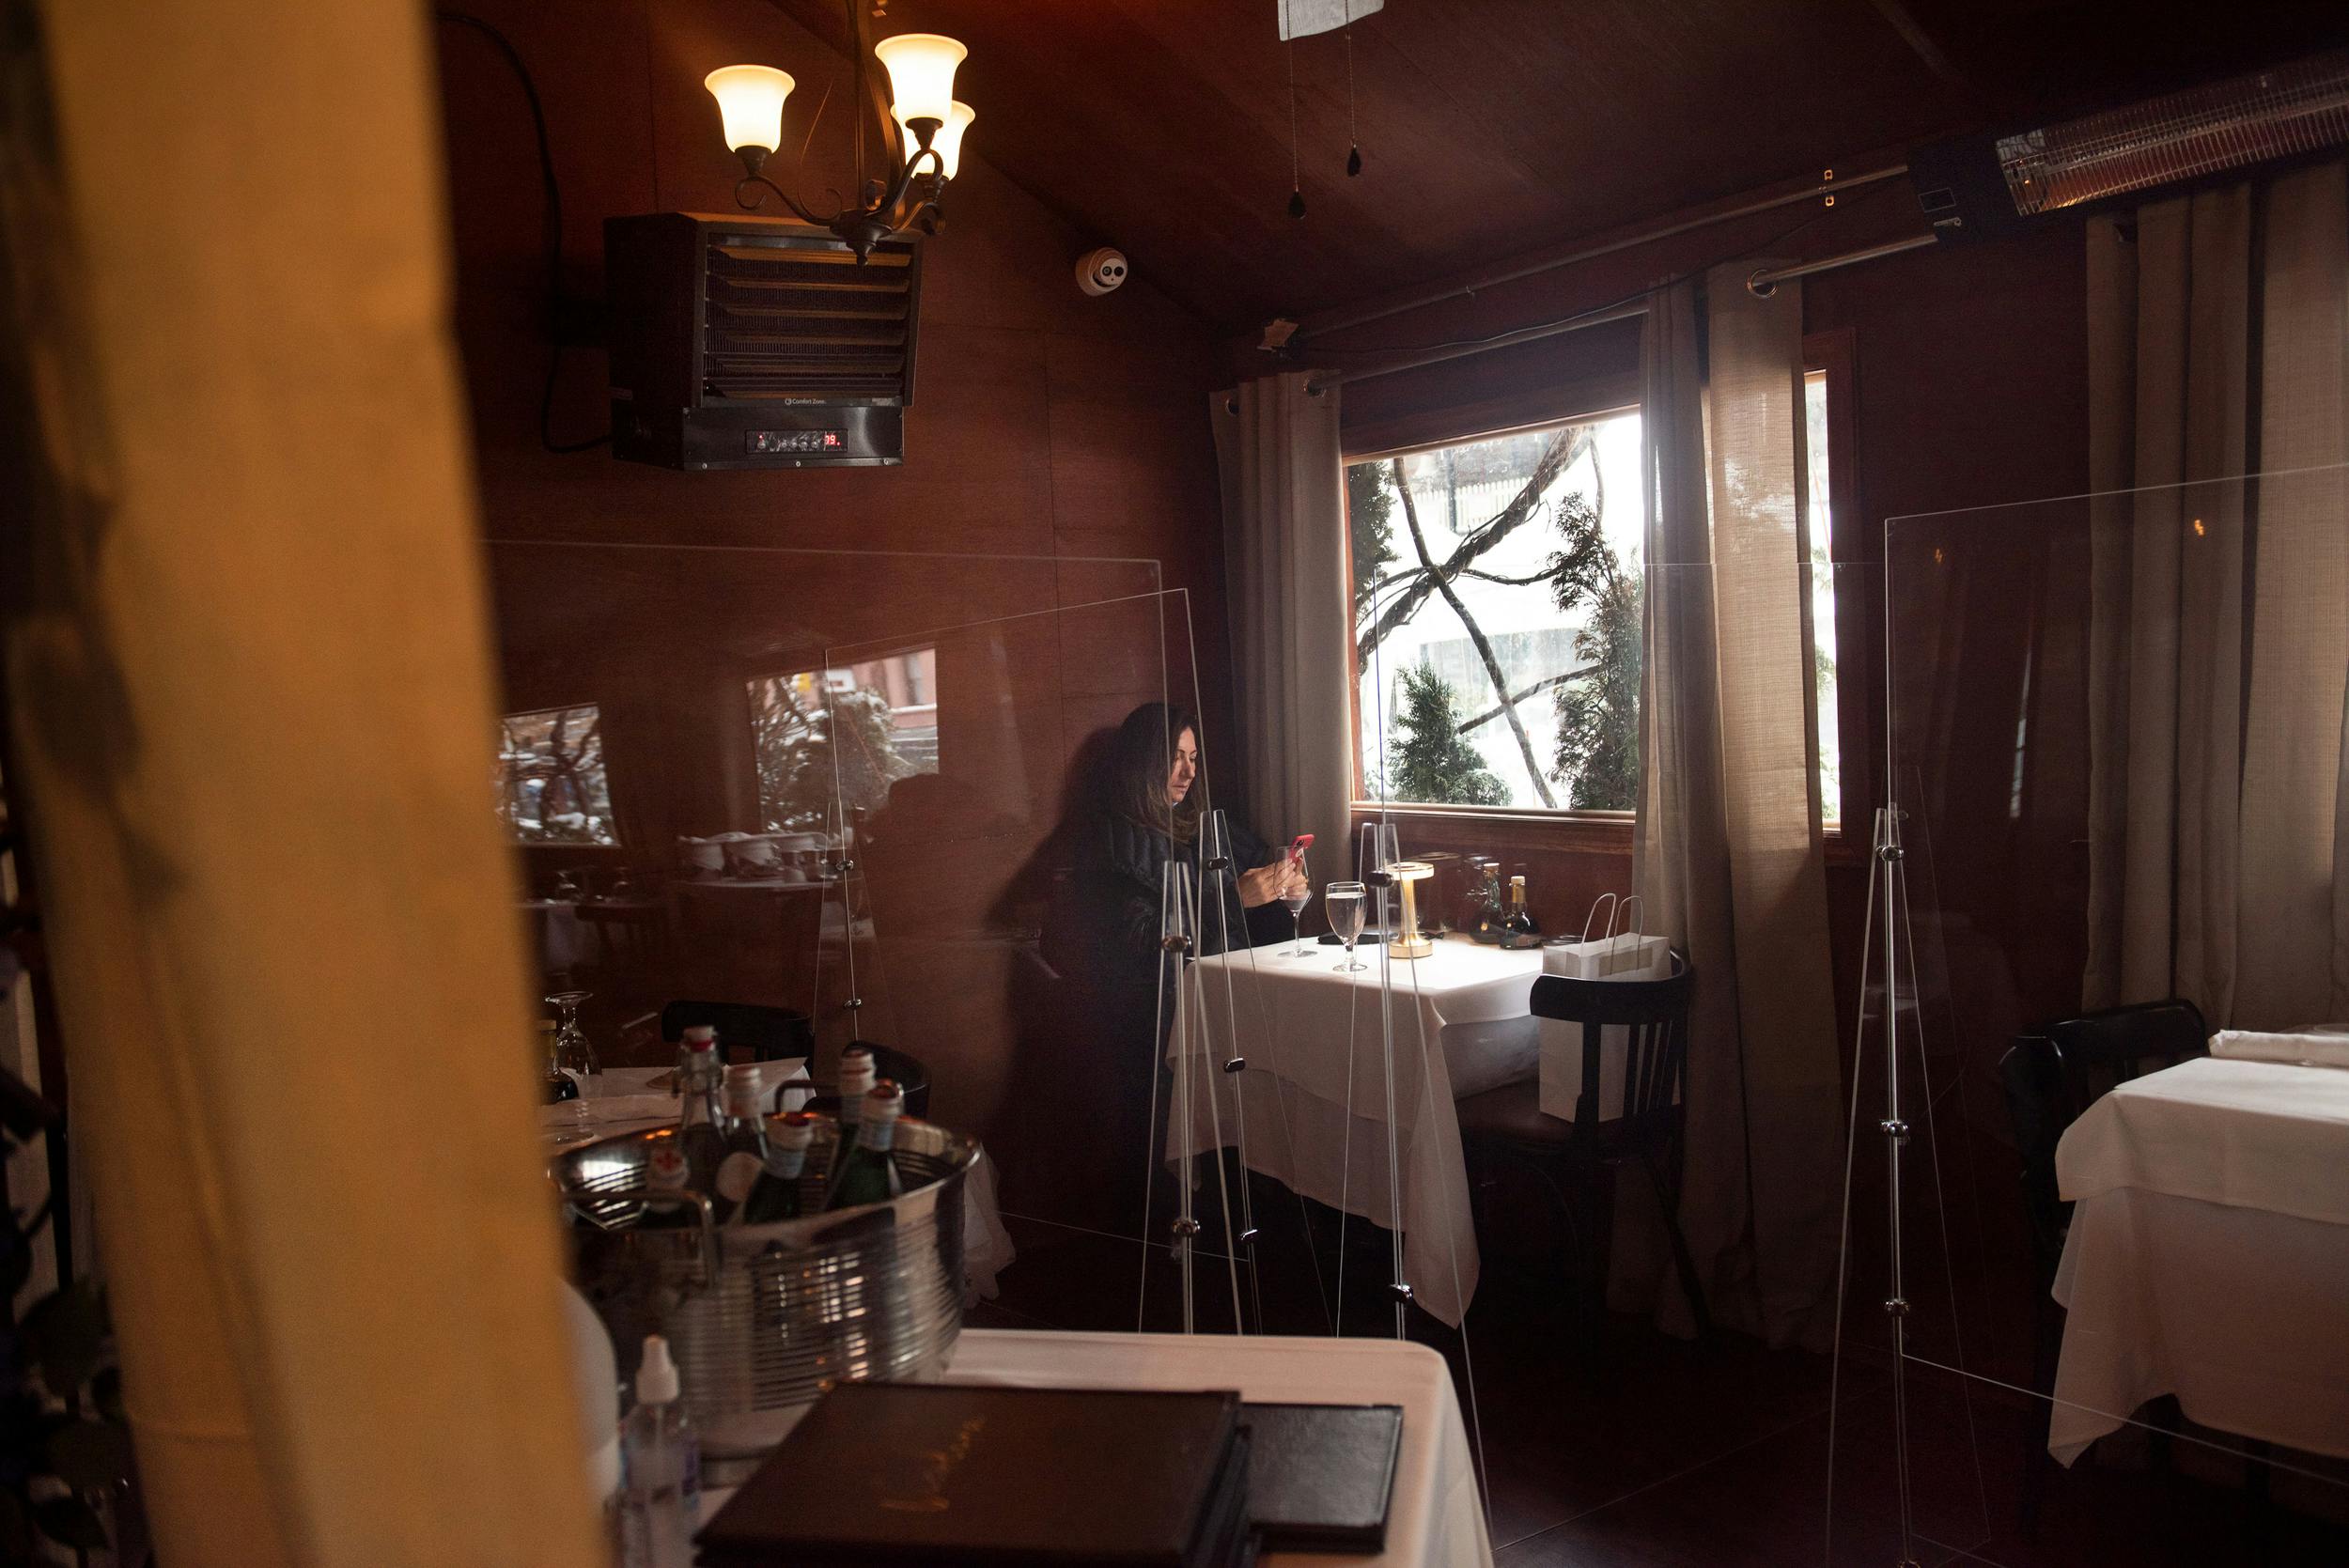 'The Cozy Corner Table' from the artist's 'DINING ALONE In the Company of Solitude' book project and series. The work highlights the experience of being alone in public. The peopled restaurant interiors are a metaphor for visually expressing what being alone in public might feel like.